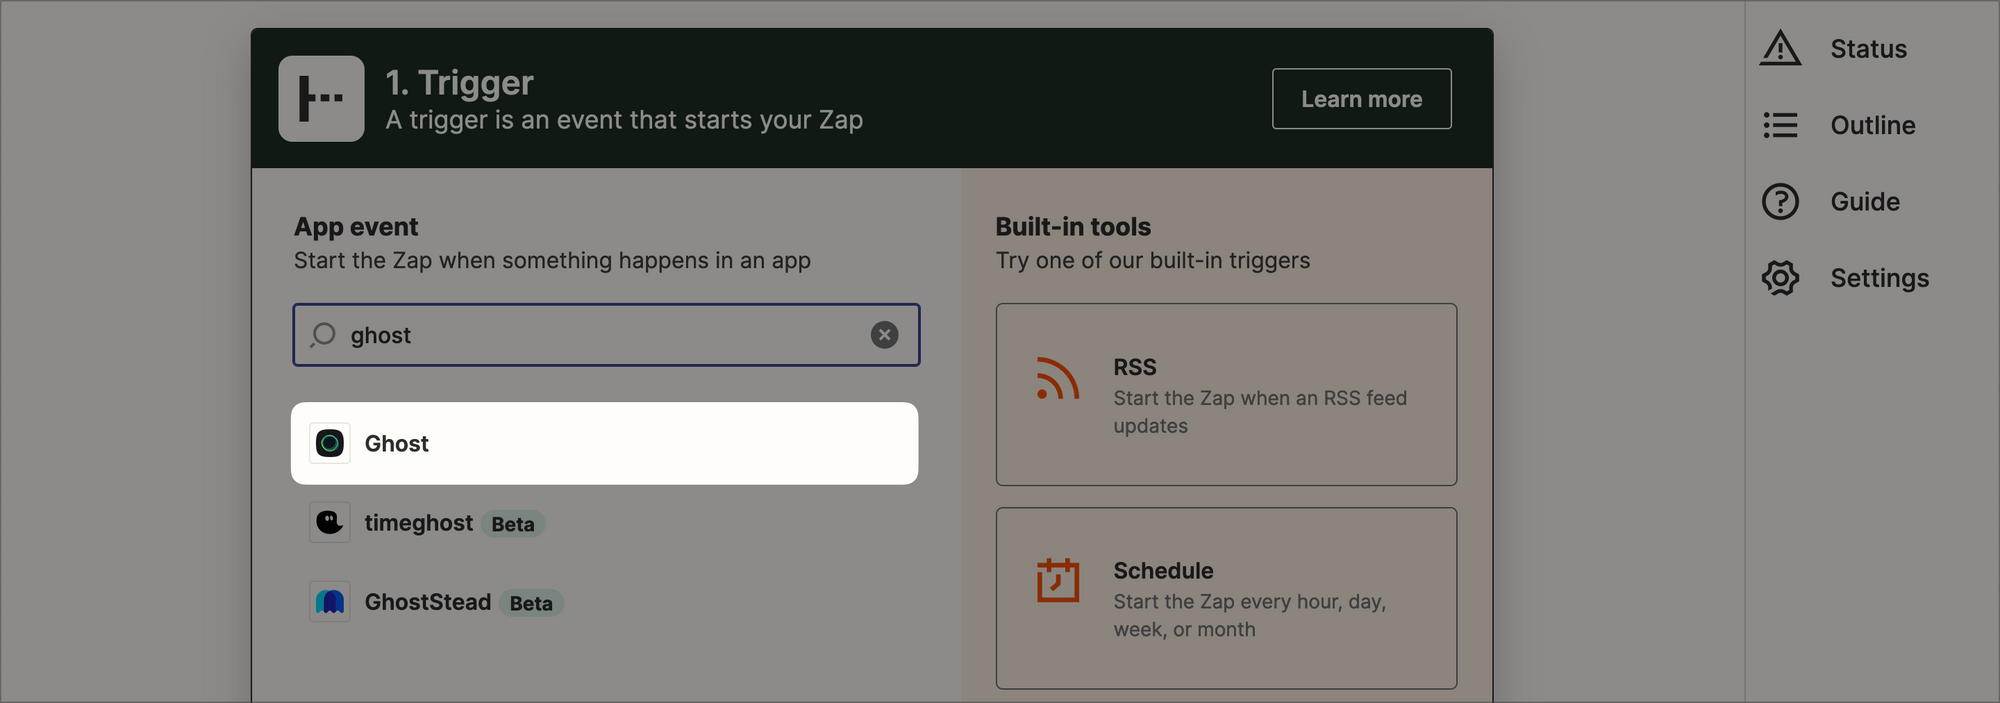 Ghost highlighted as trigger app on Zapier dashboard